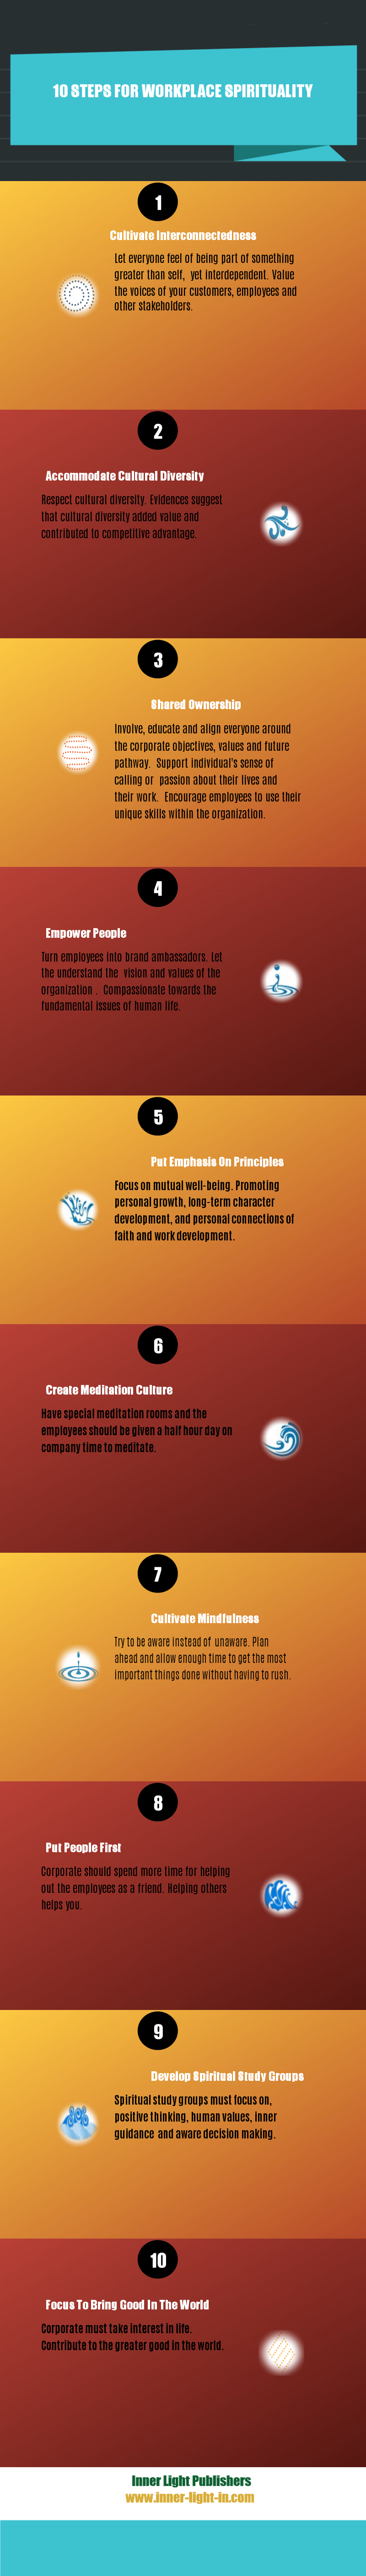 10 steps for workplace spirituality infographic